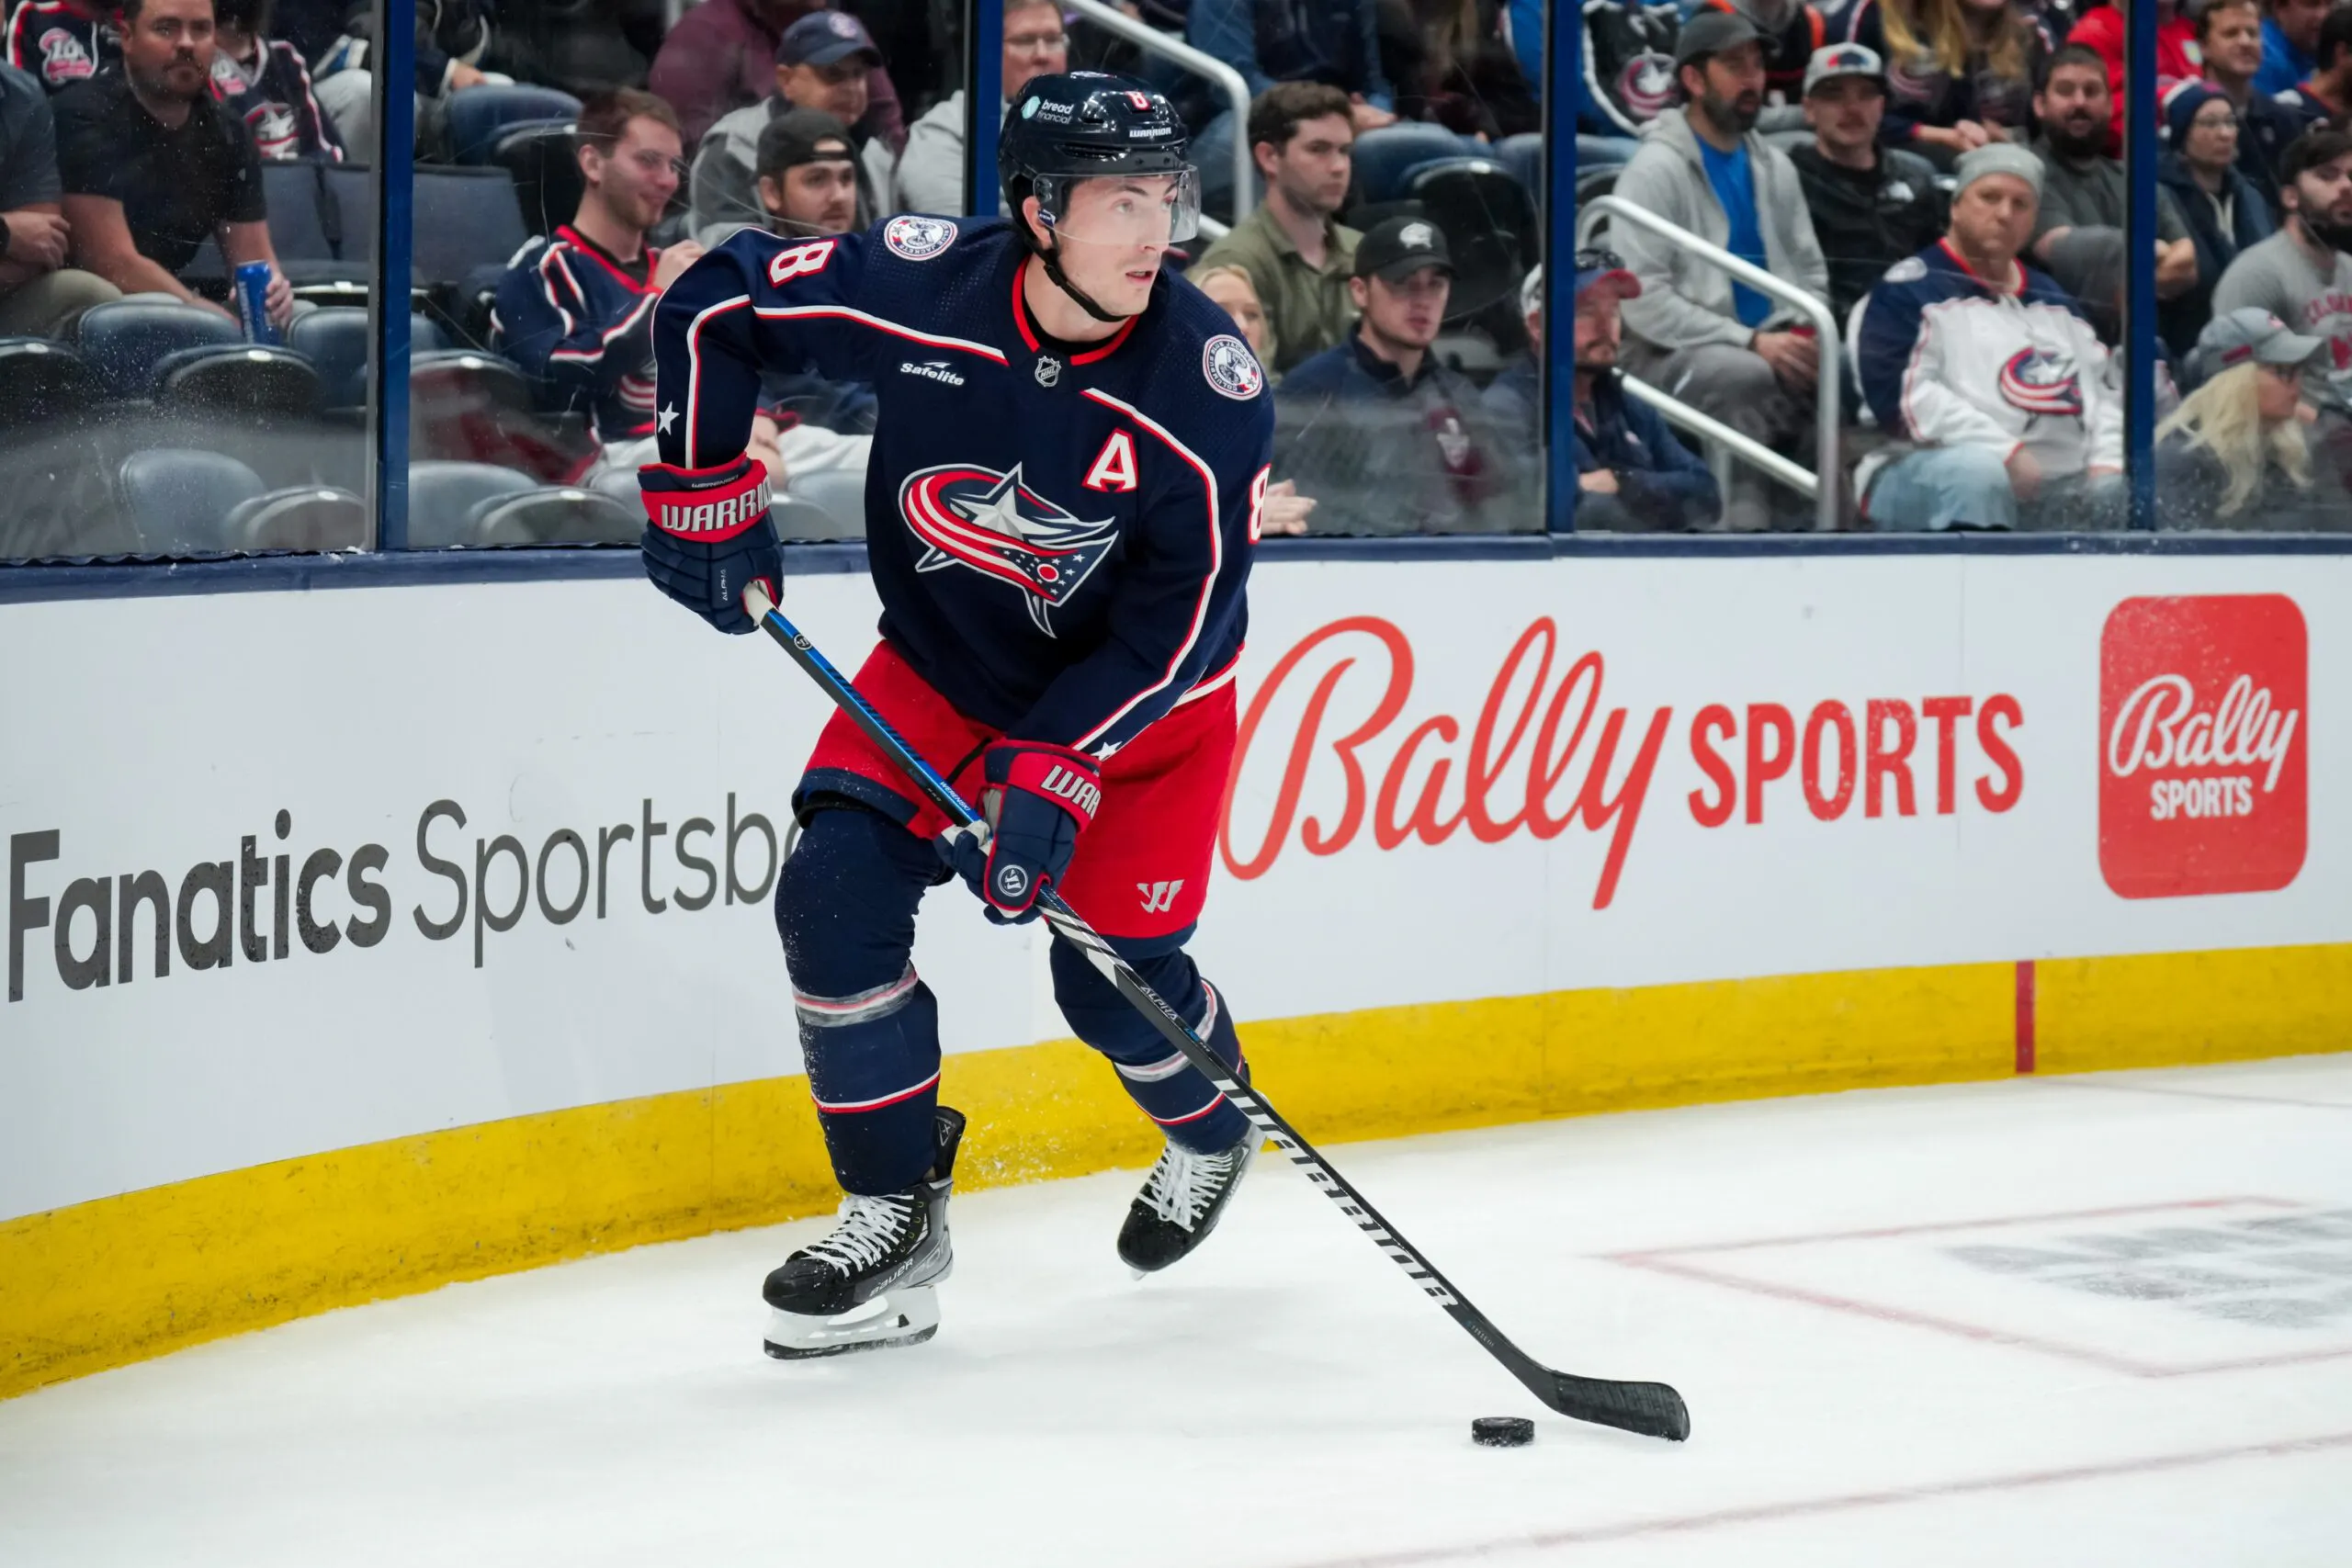 Columbus Blue Jackets’ Zach Werenski to miss 4-6 weeks with ankle injury